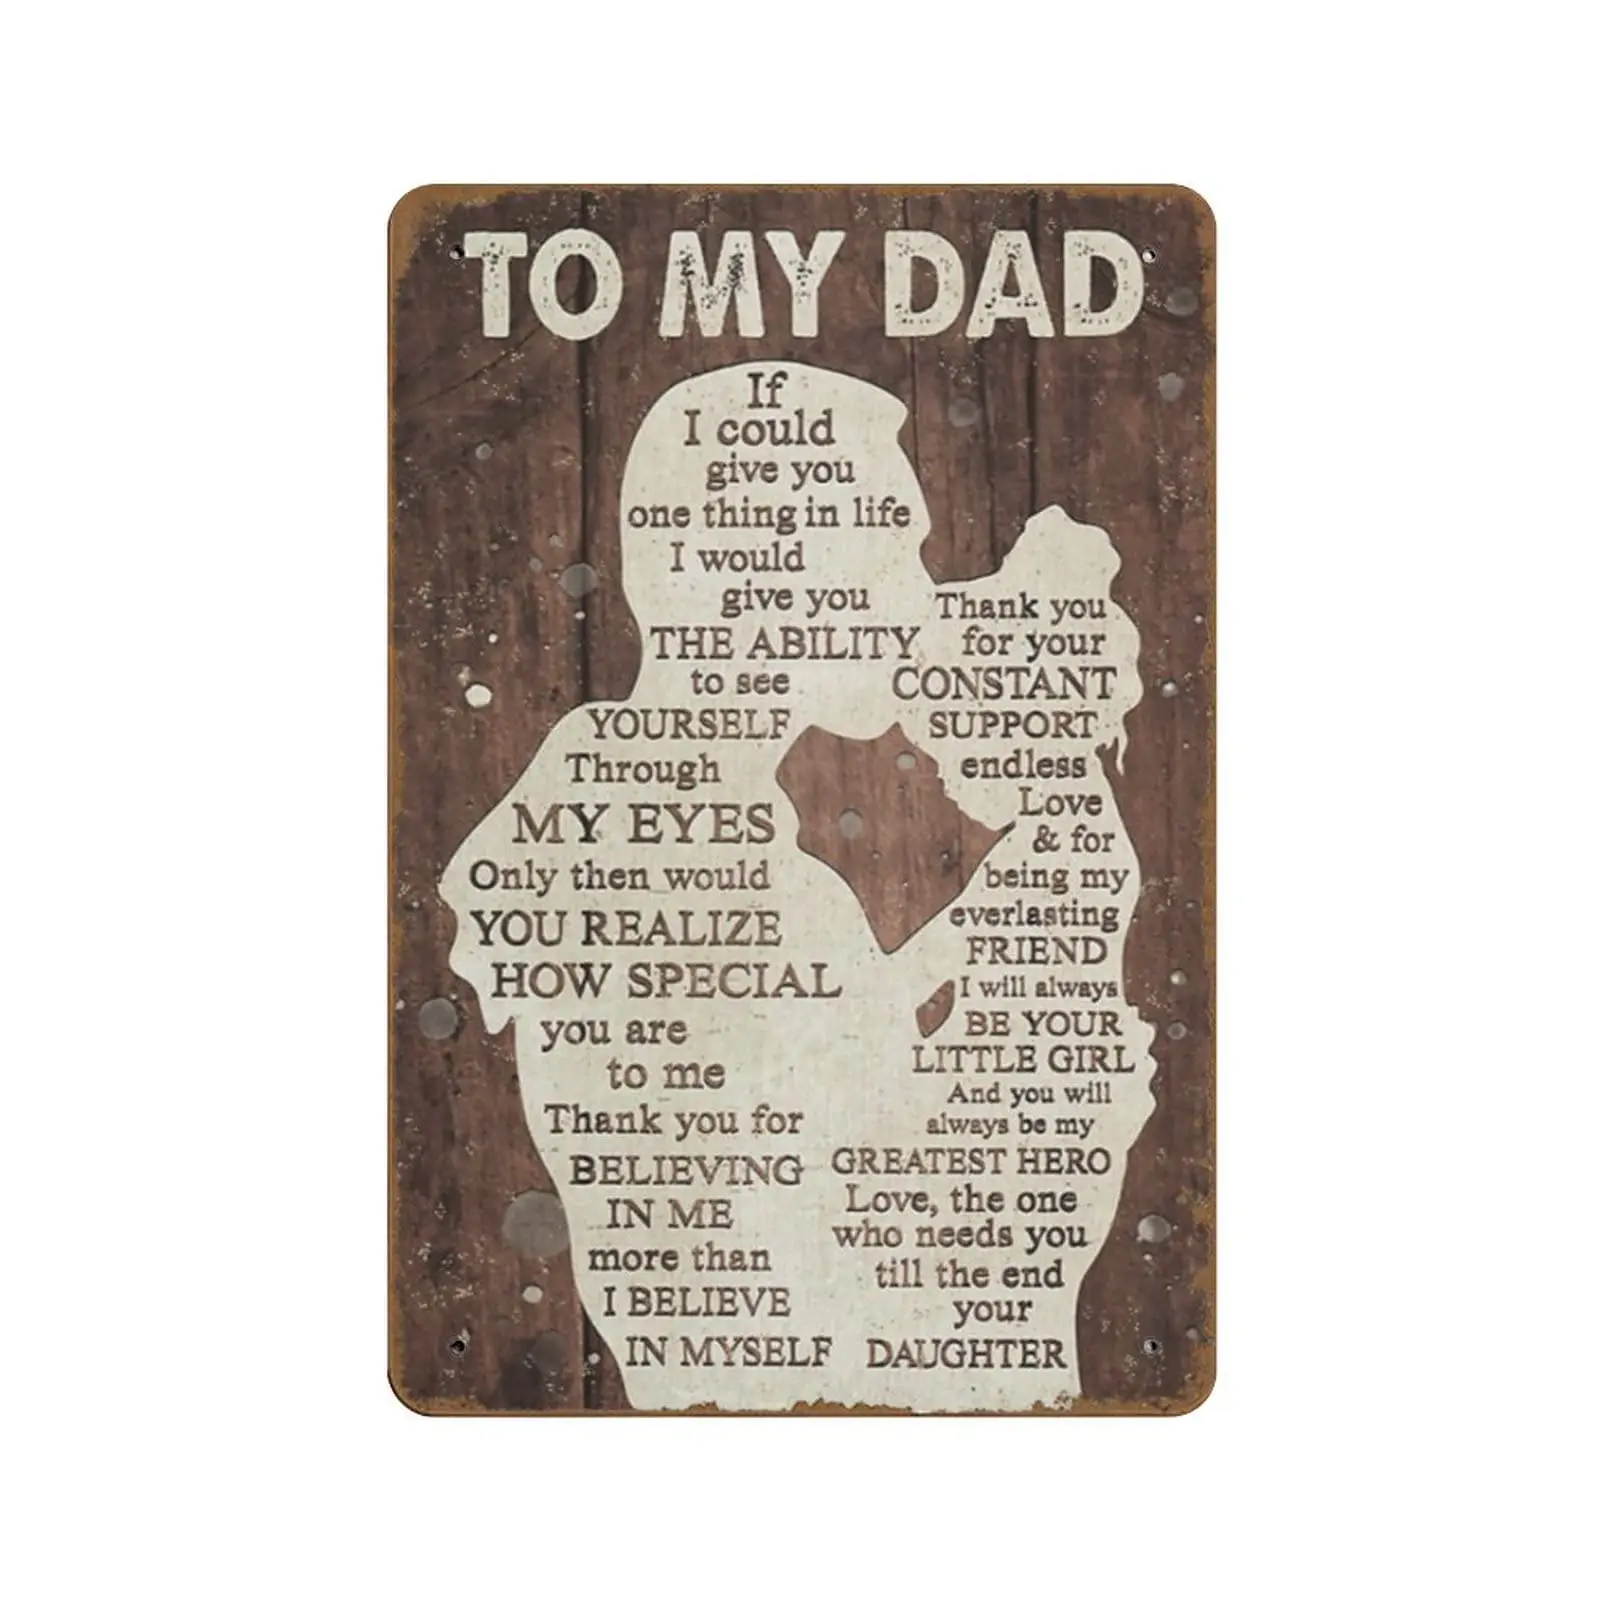 

To My Dad If I Could Give You One Thing in Life Gift for Dad from Daughter Birthday, Print Wall Art Novelty Father's Day Tin